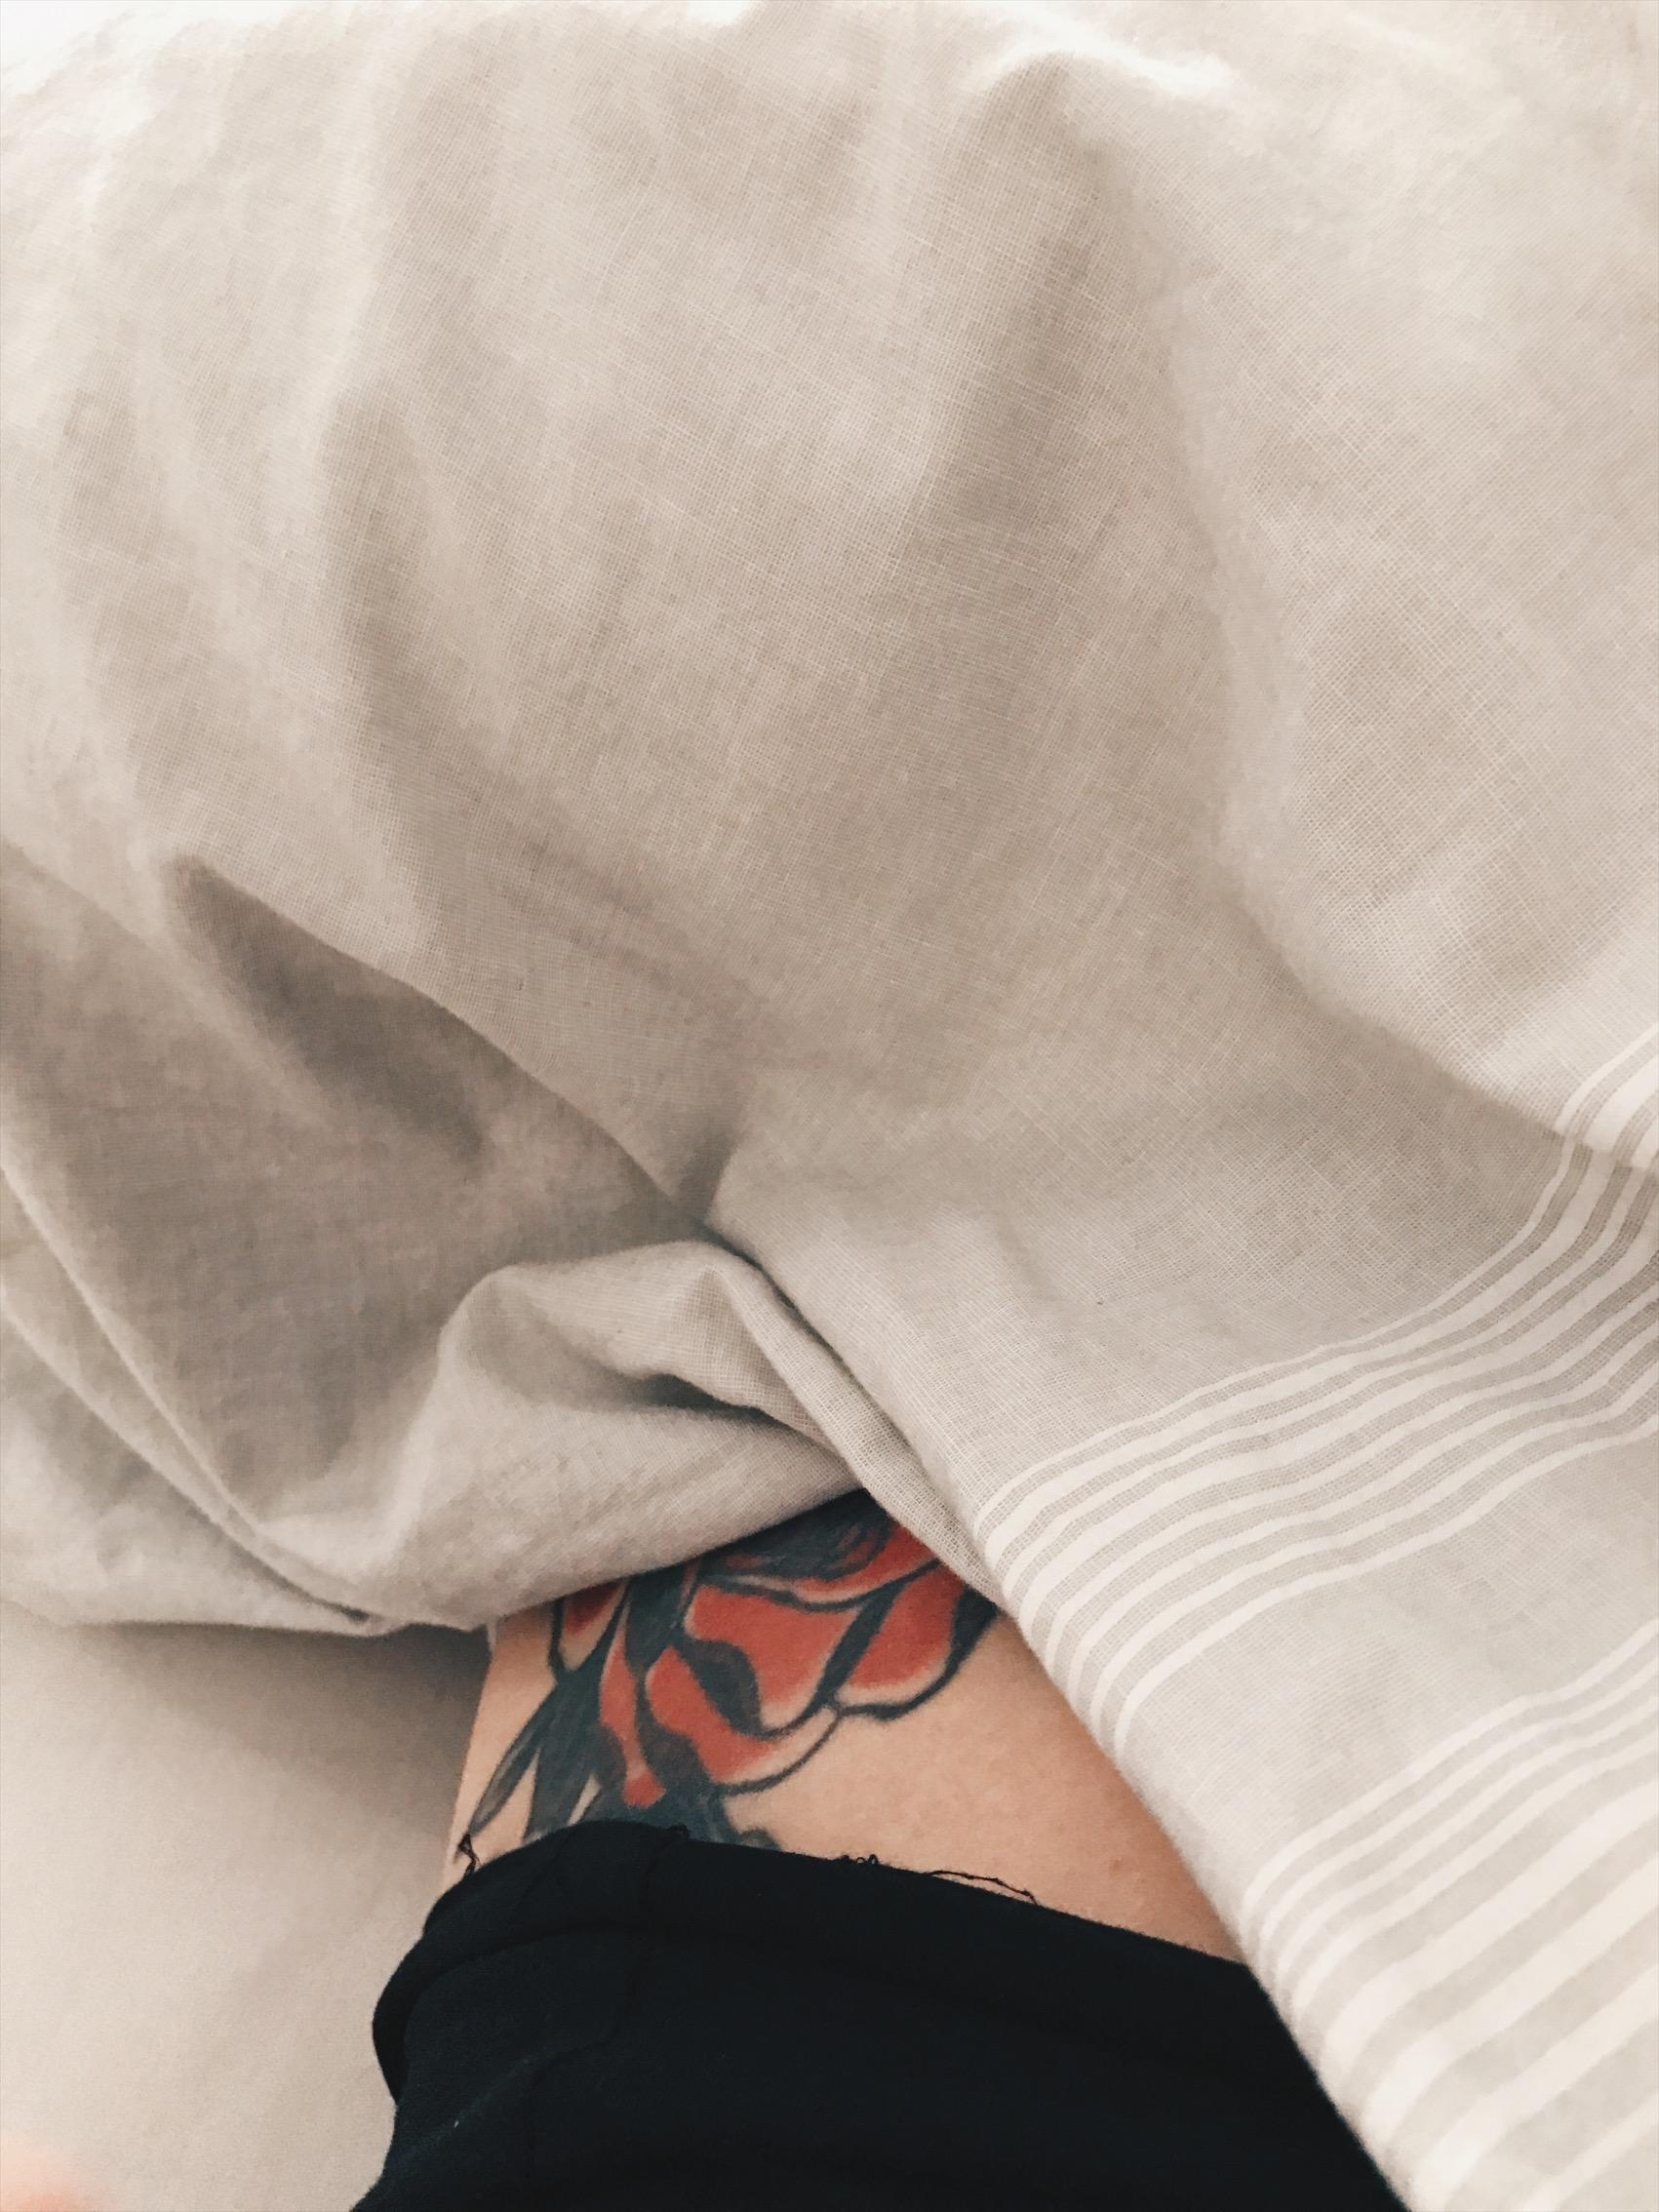 Tattoo
#Roses #tattoo #bed #bedroom #couchliebt #Details #tattoos